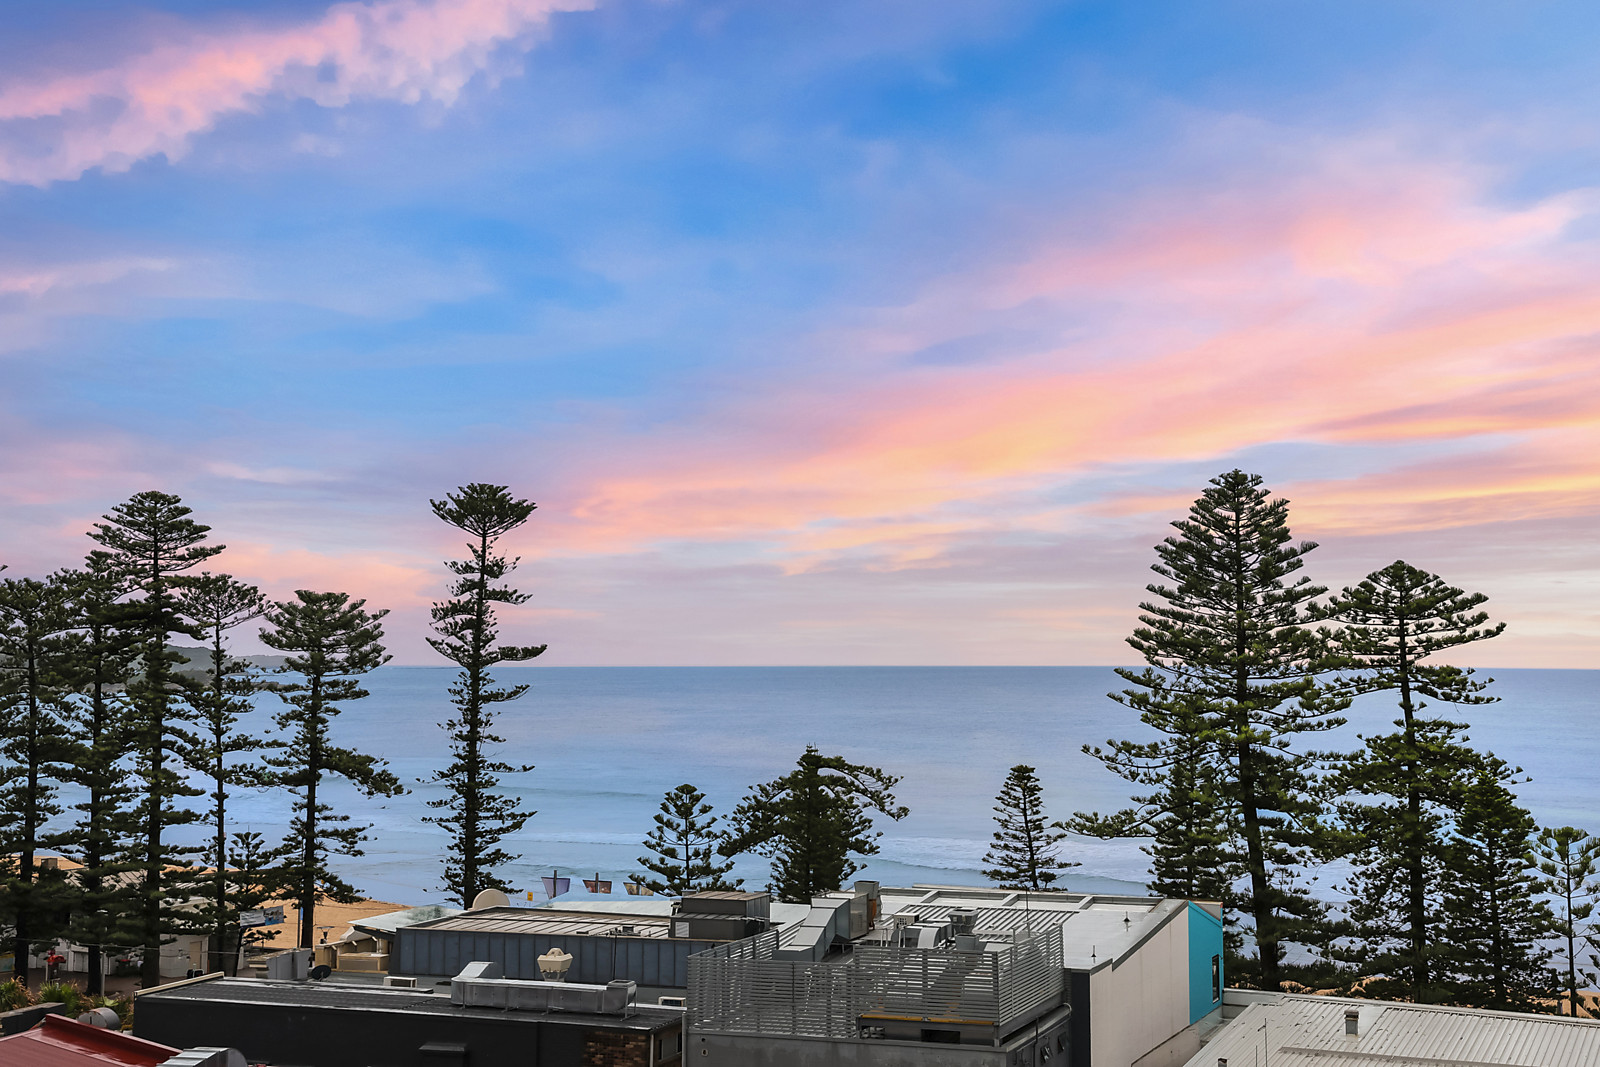 735/25 Wentworth Street, Manly featured